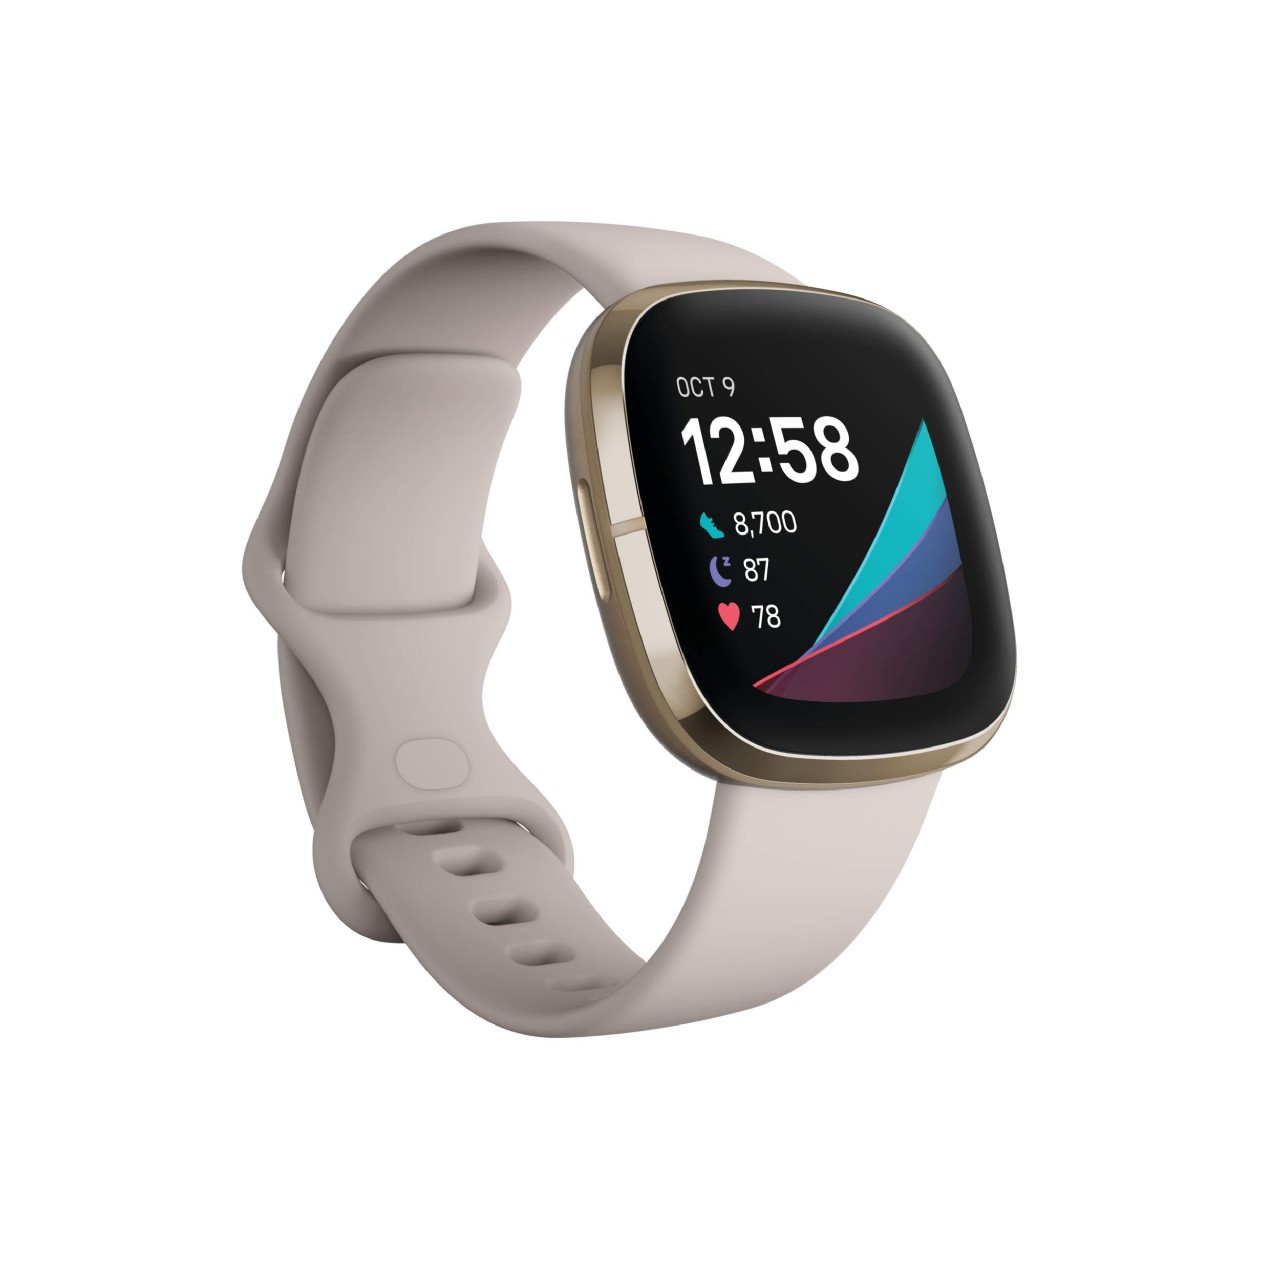 To set the date and time on your Fitbit Sense